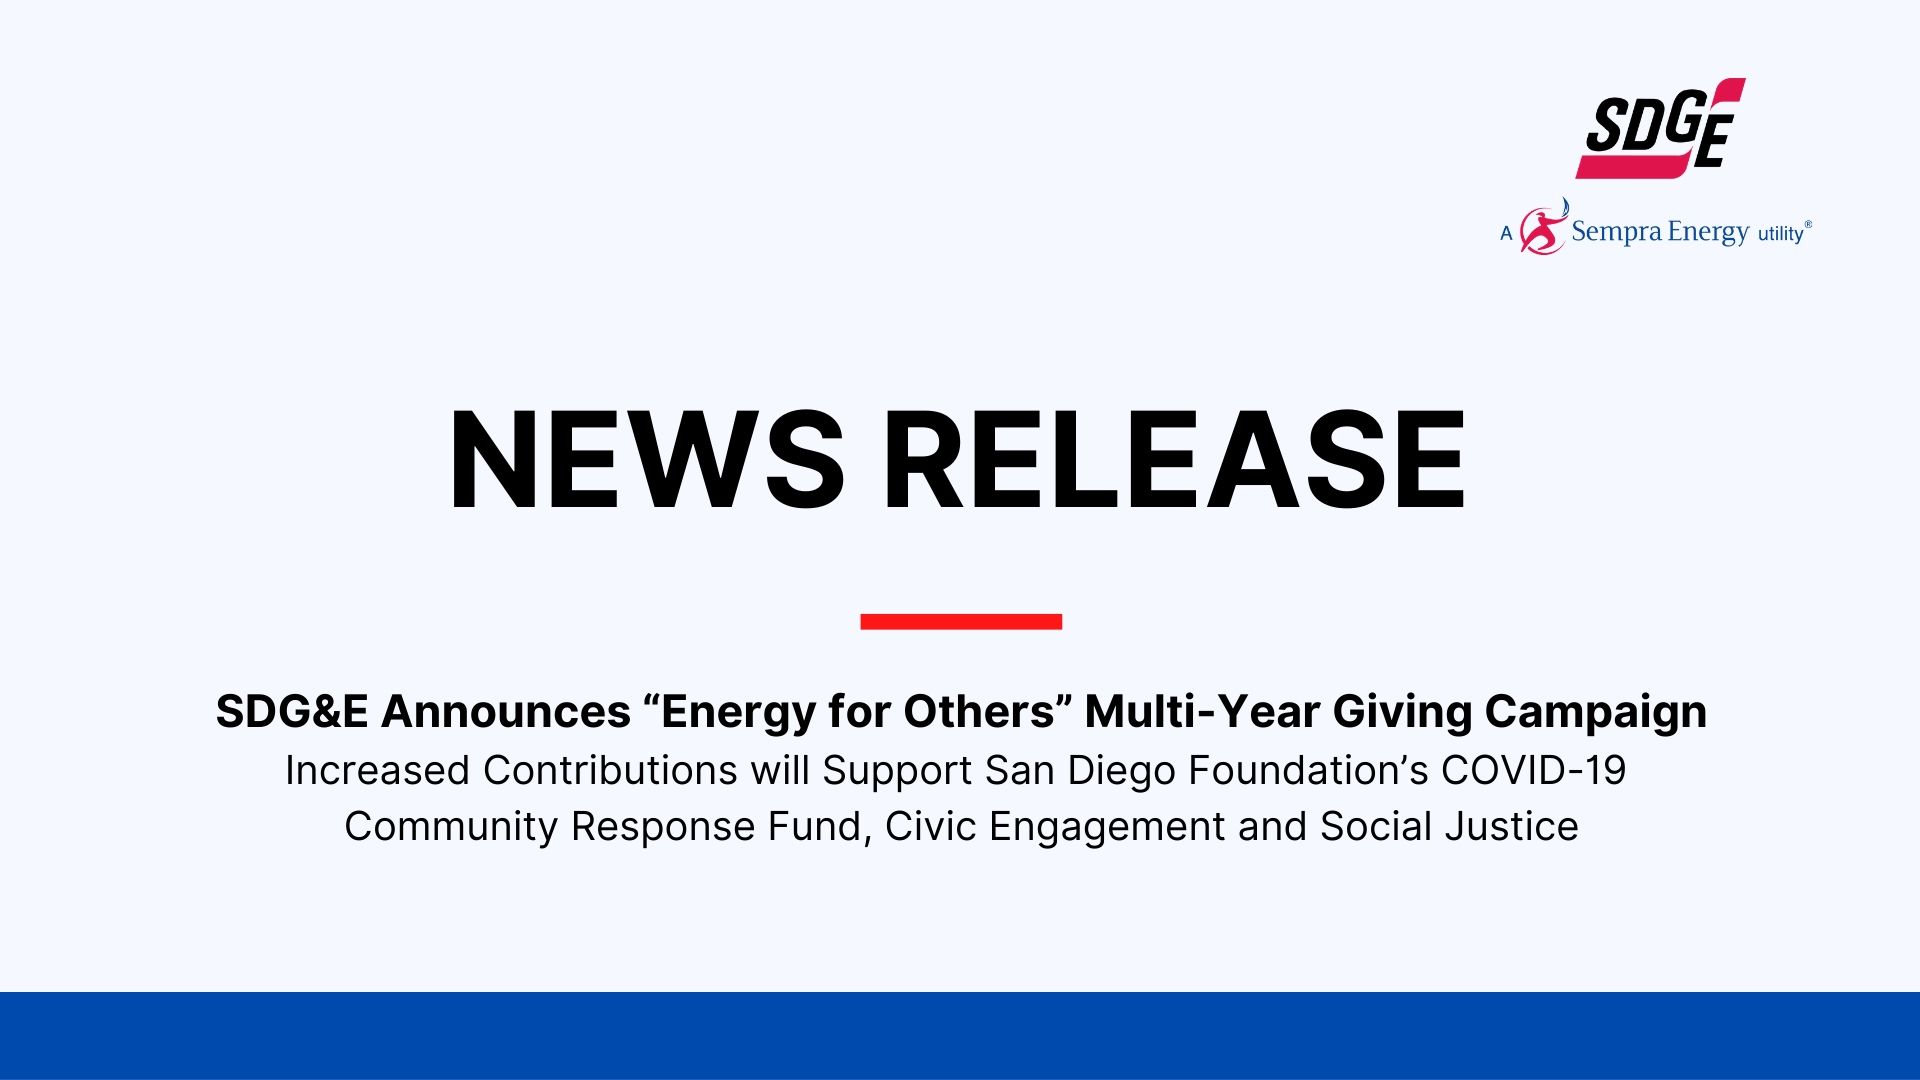 SDG&E Announces "Energy for Others" Multi-Year Giving Campaign 